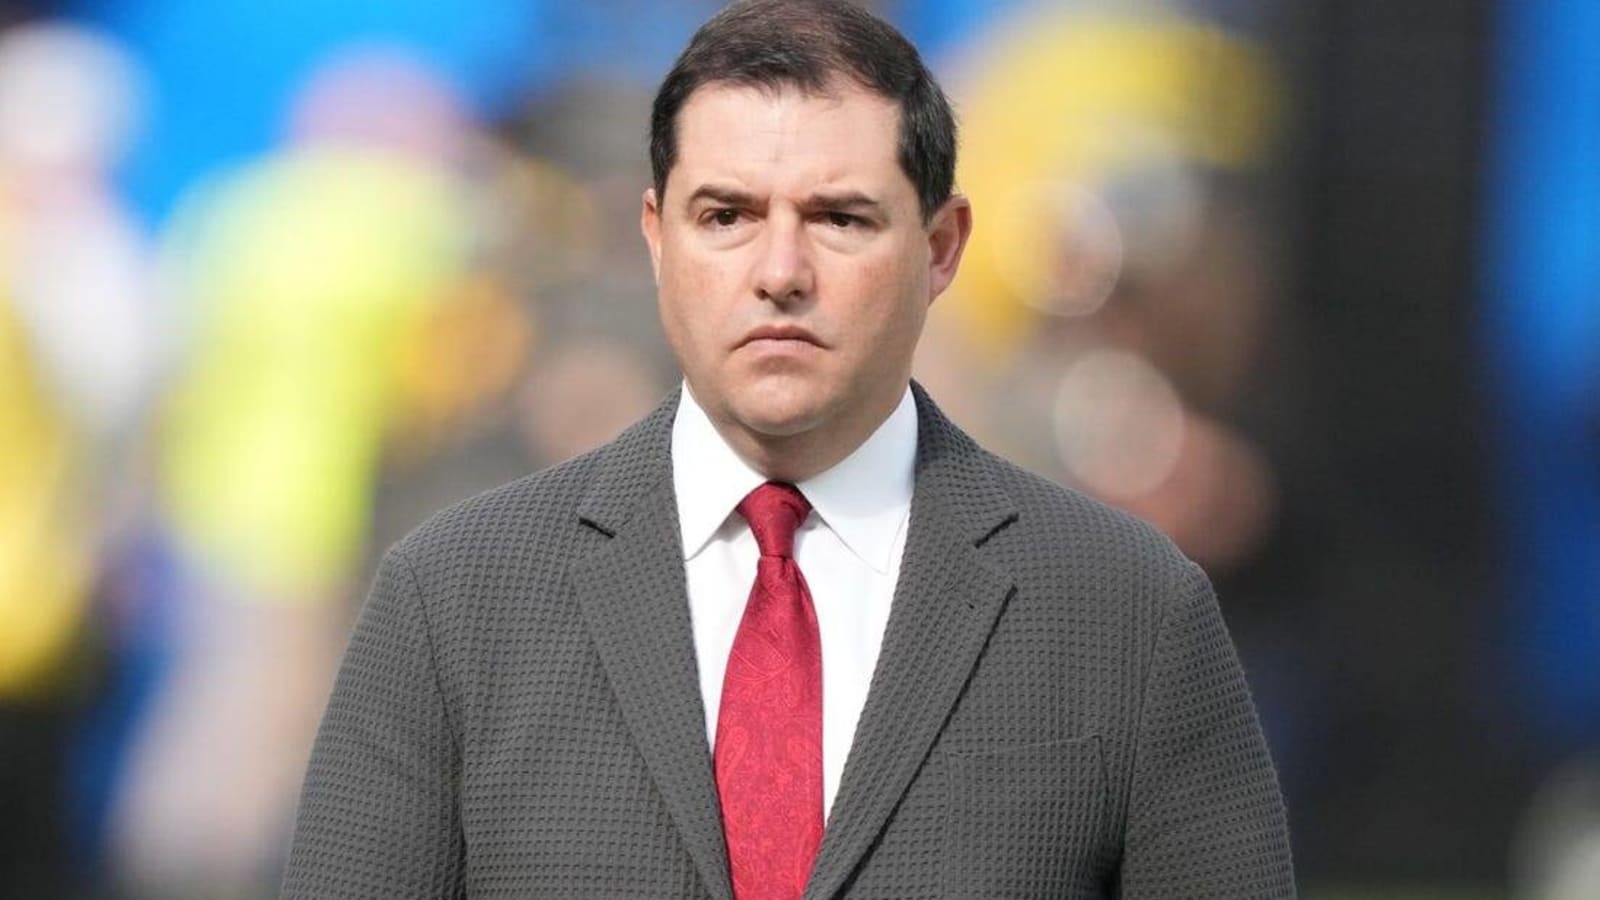 Report: 49ers CEO Jed York sued for alleged insider trading